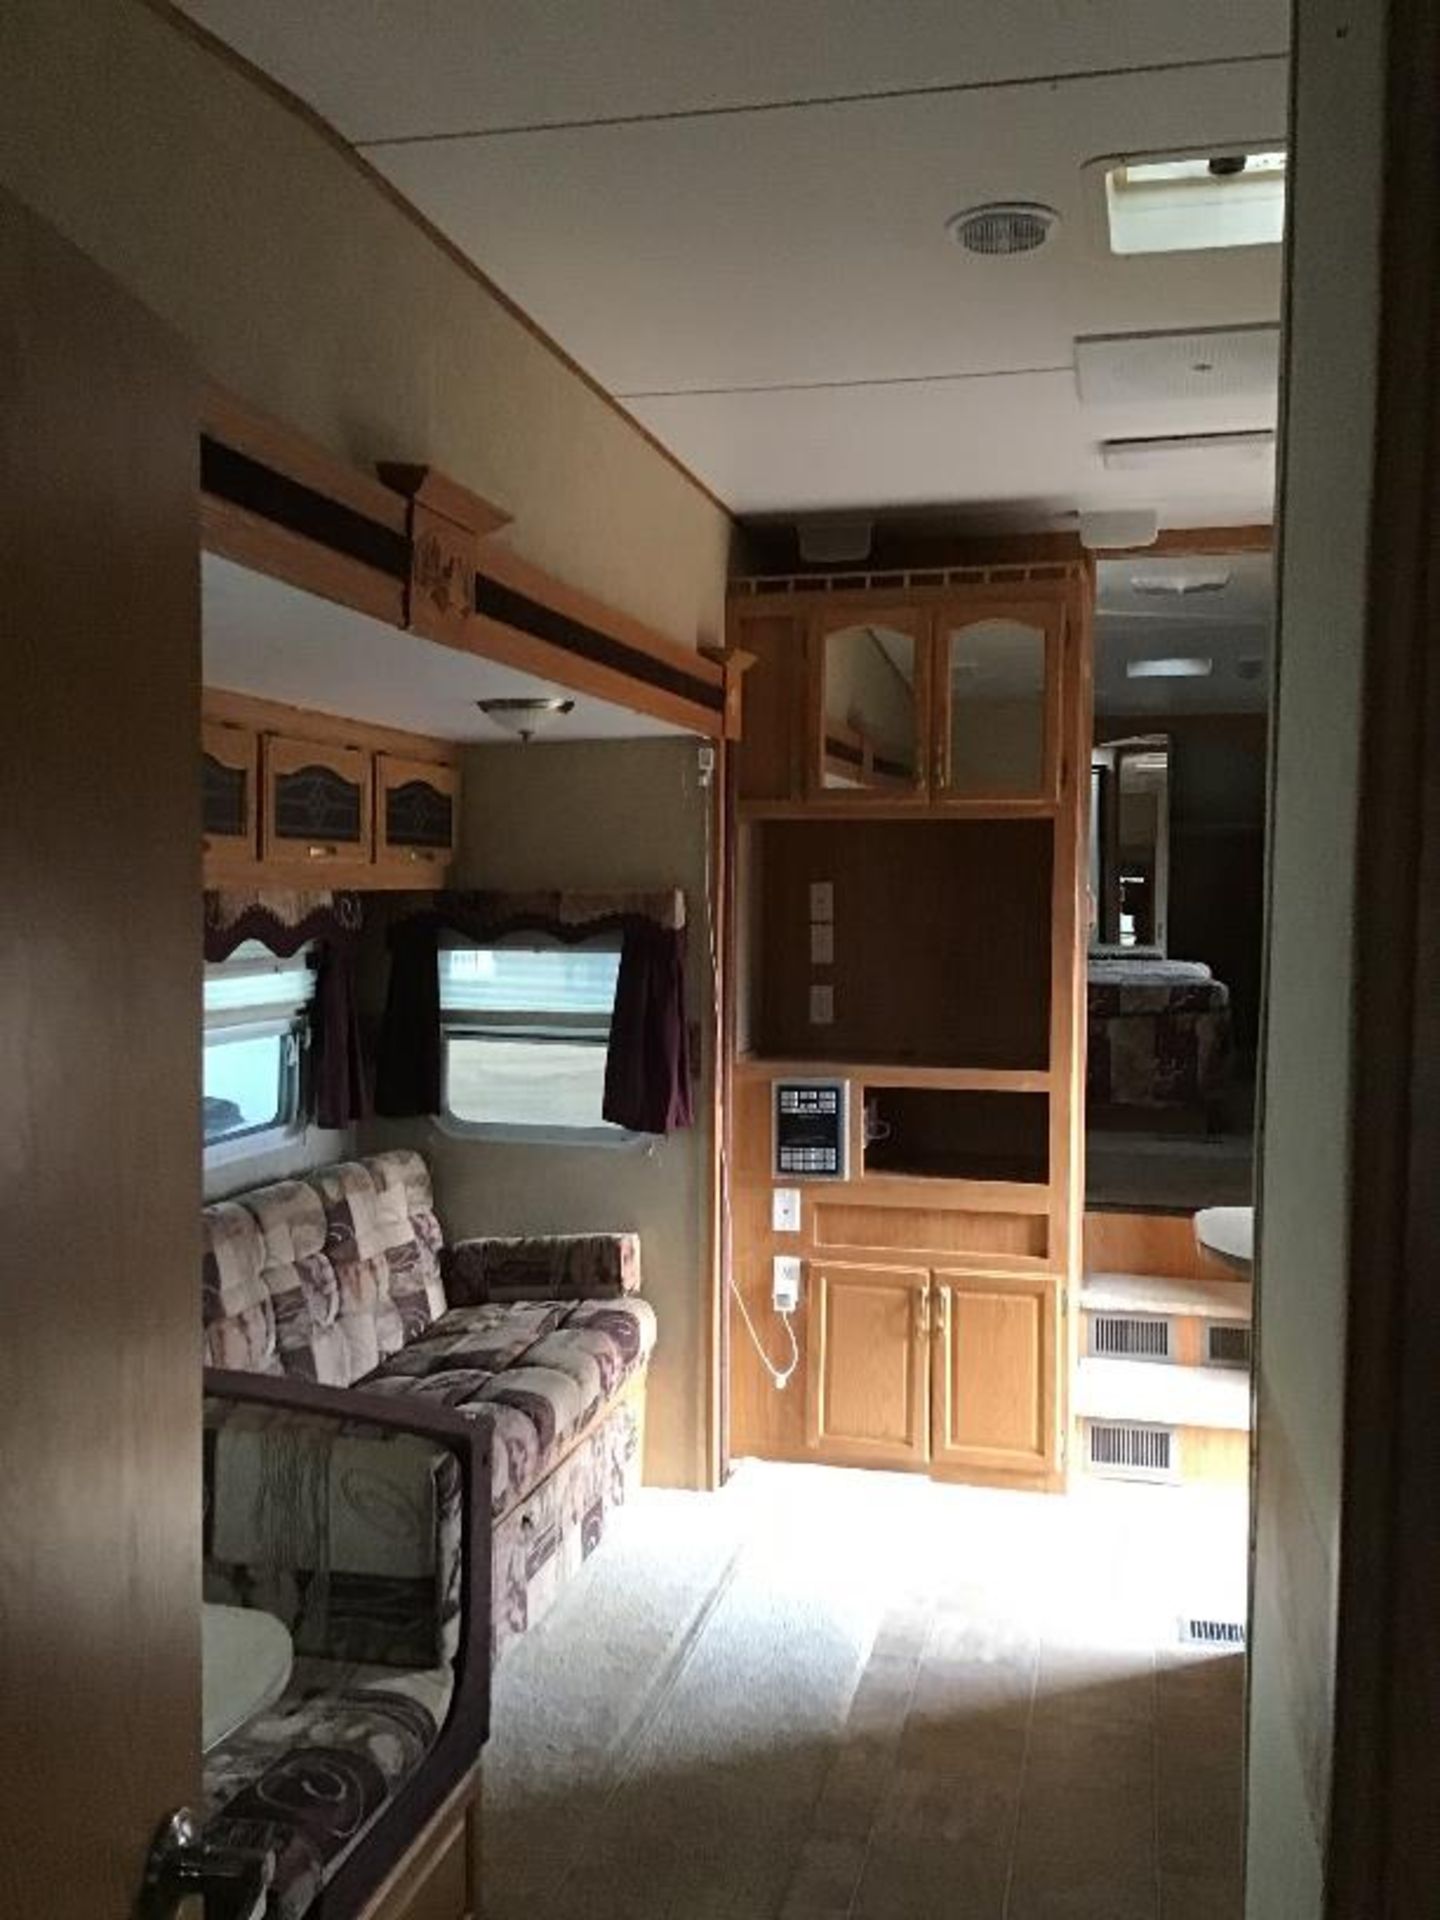 2007 Sandpiper F315 by Forest River 5th Wheel Holiday Trailer - Image 18 of 29